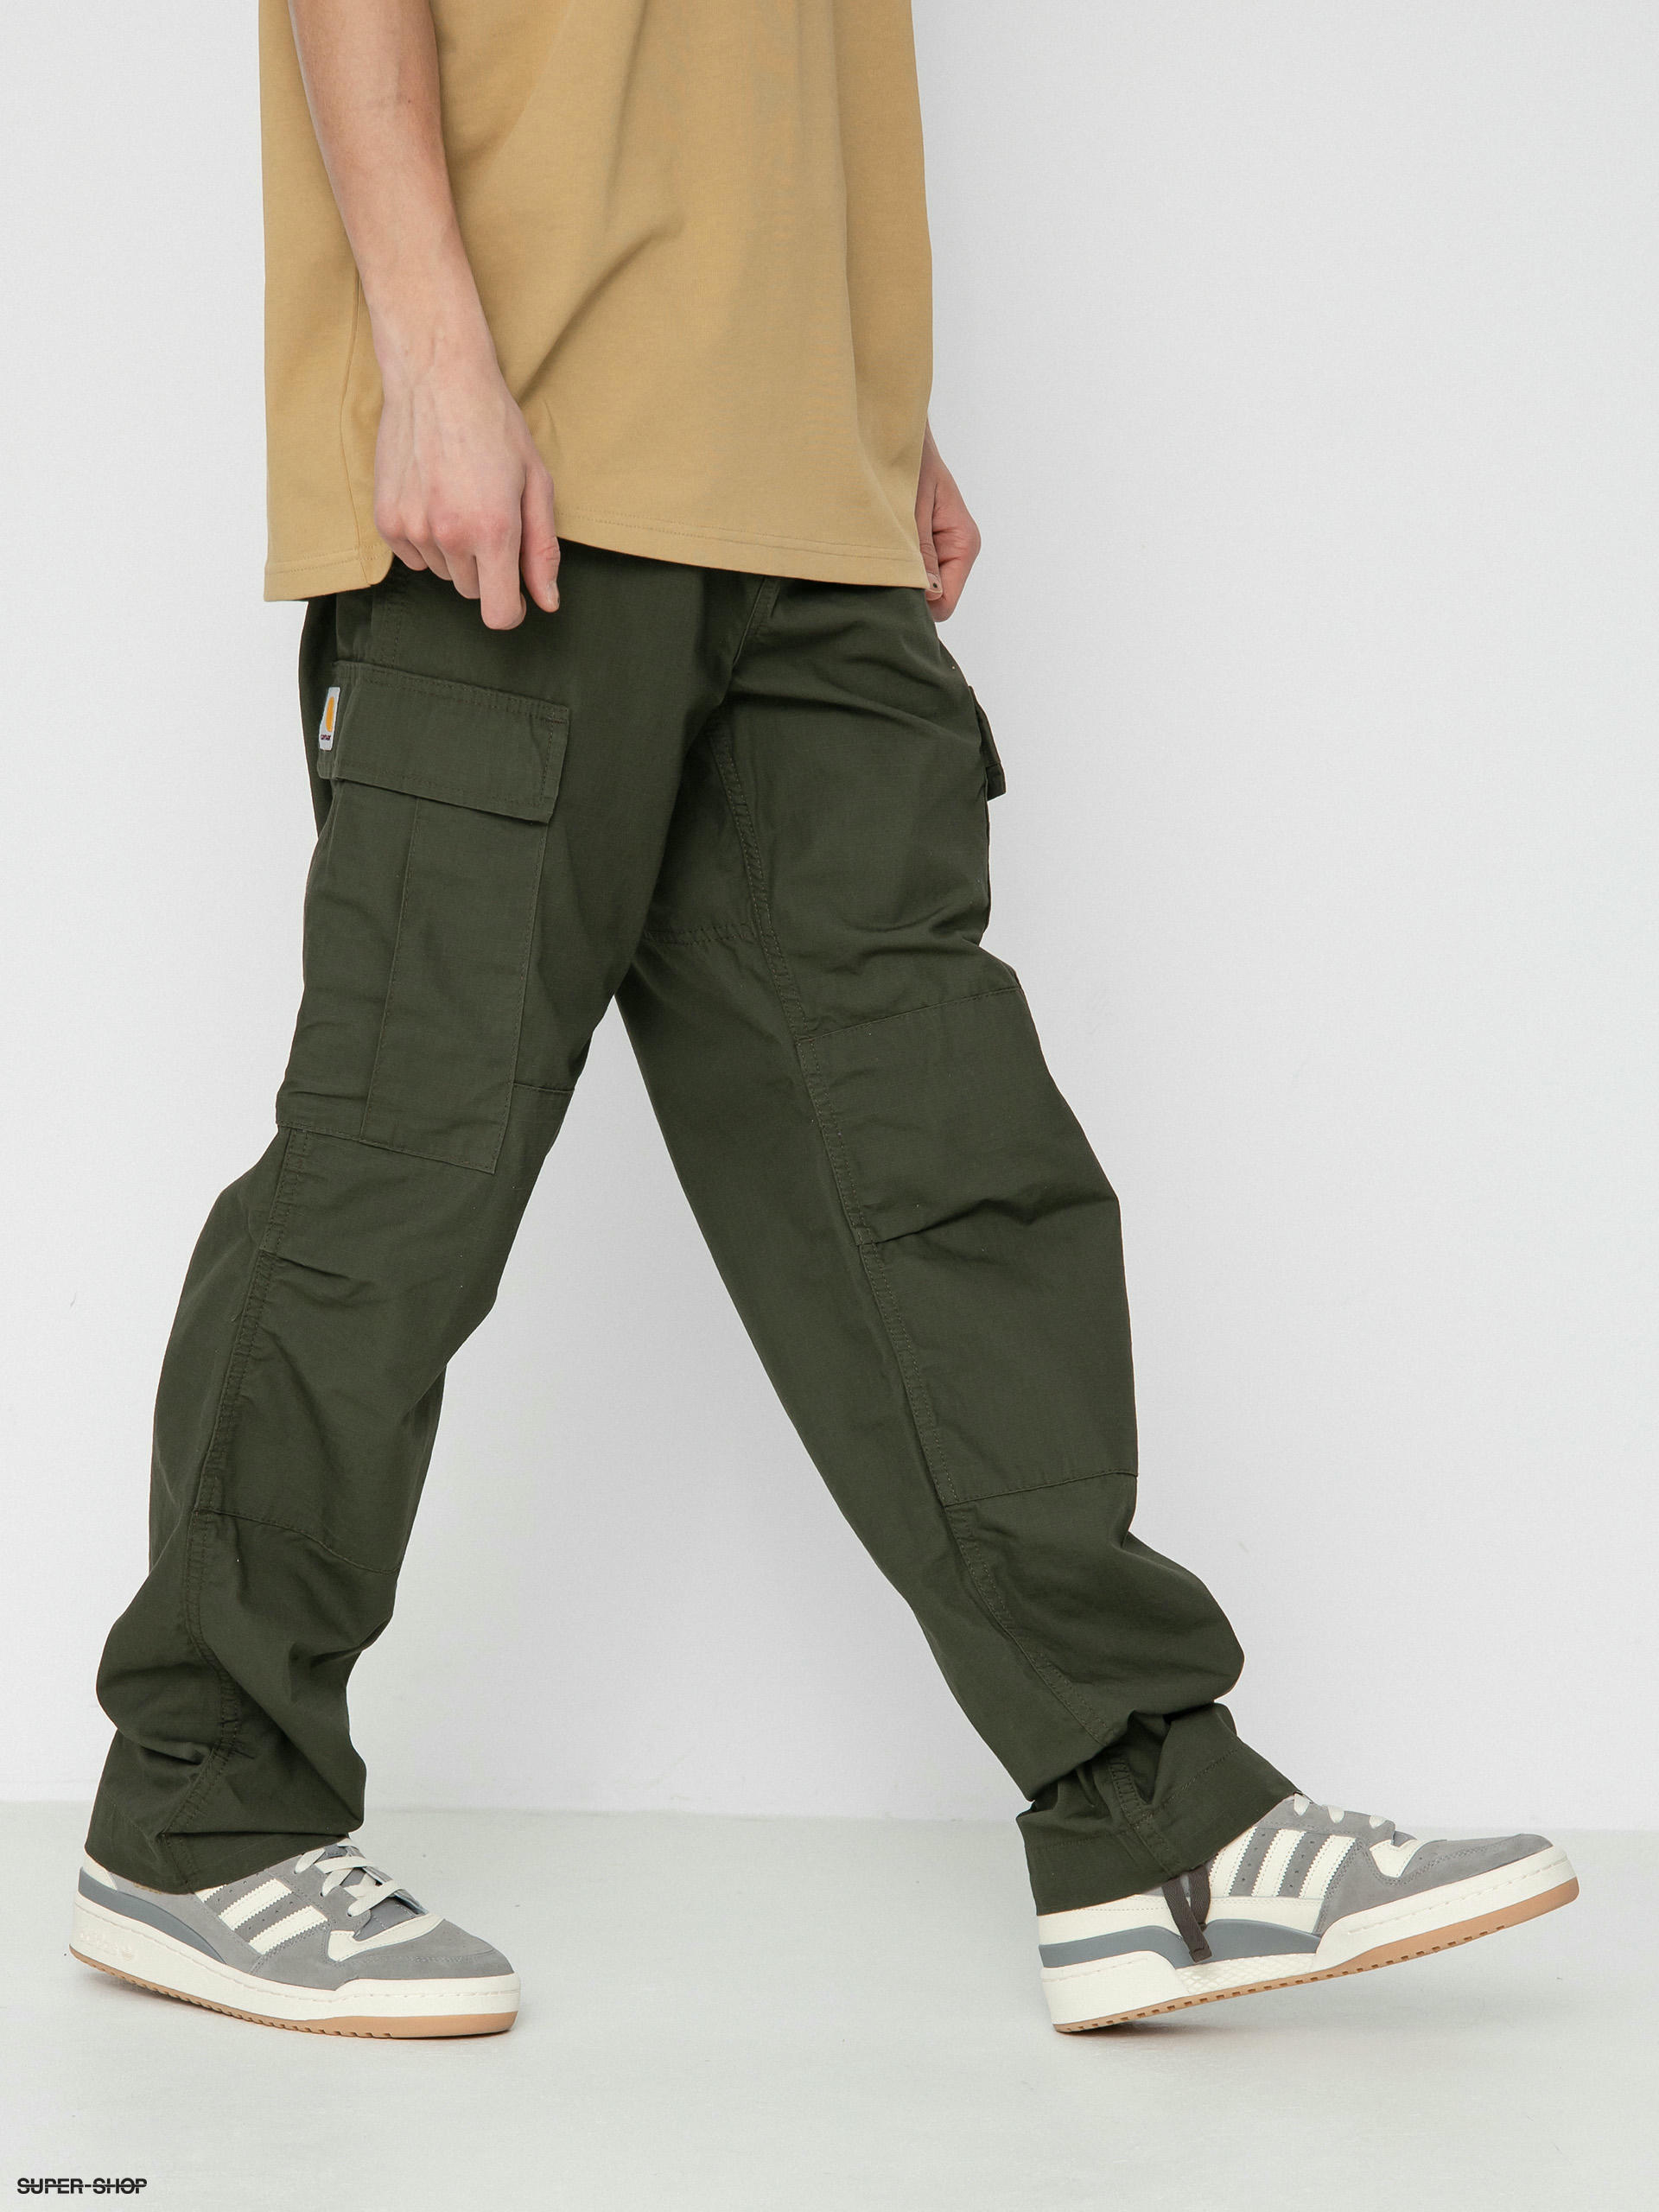 Men's Organic Cotton Double Knee Pants by Carhartt Wip | Coltorti Boutique